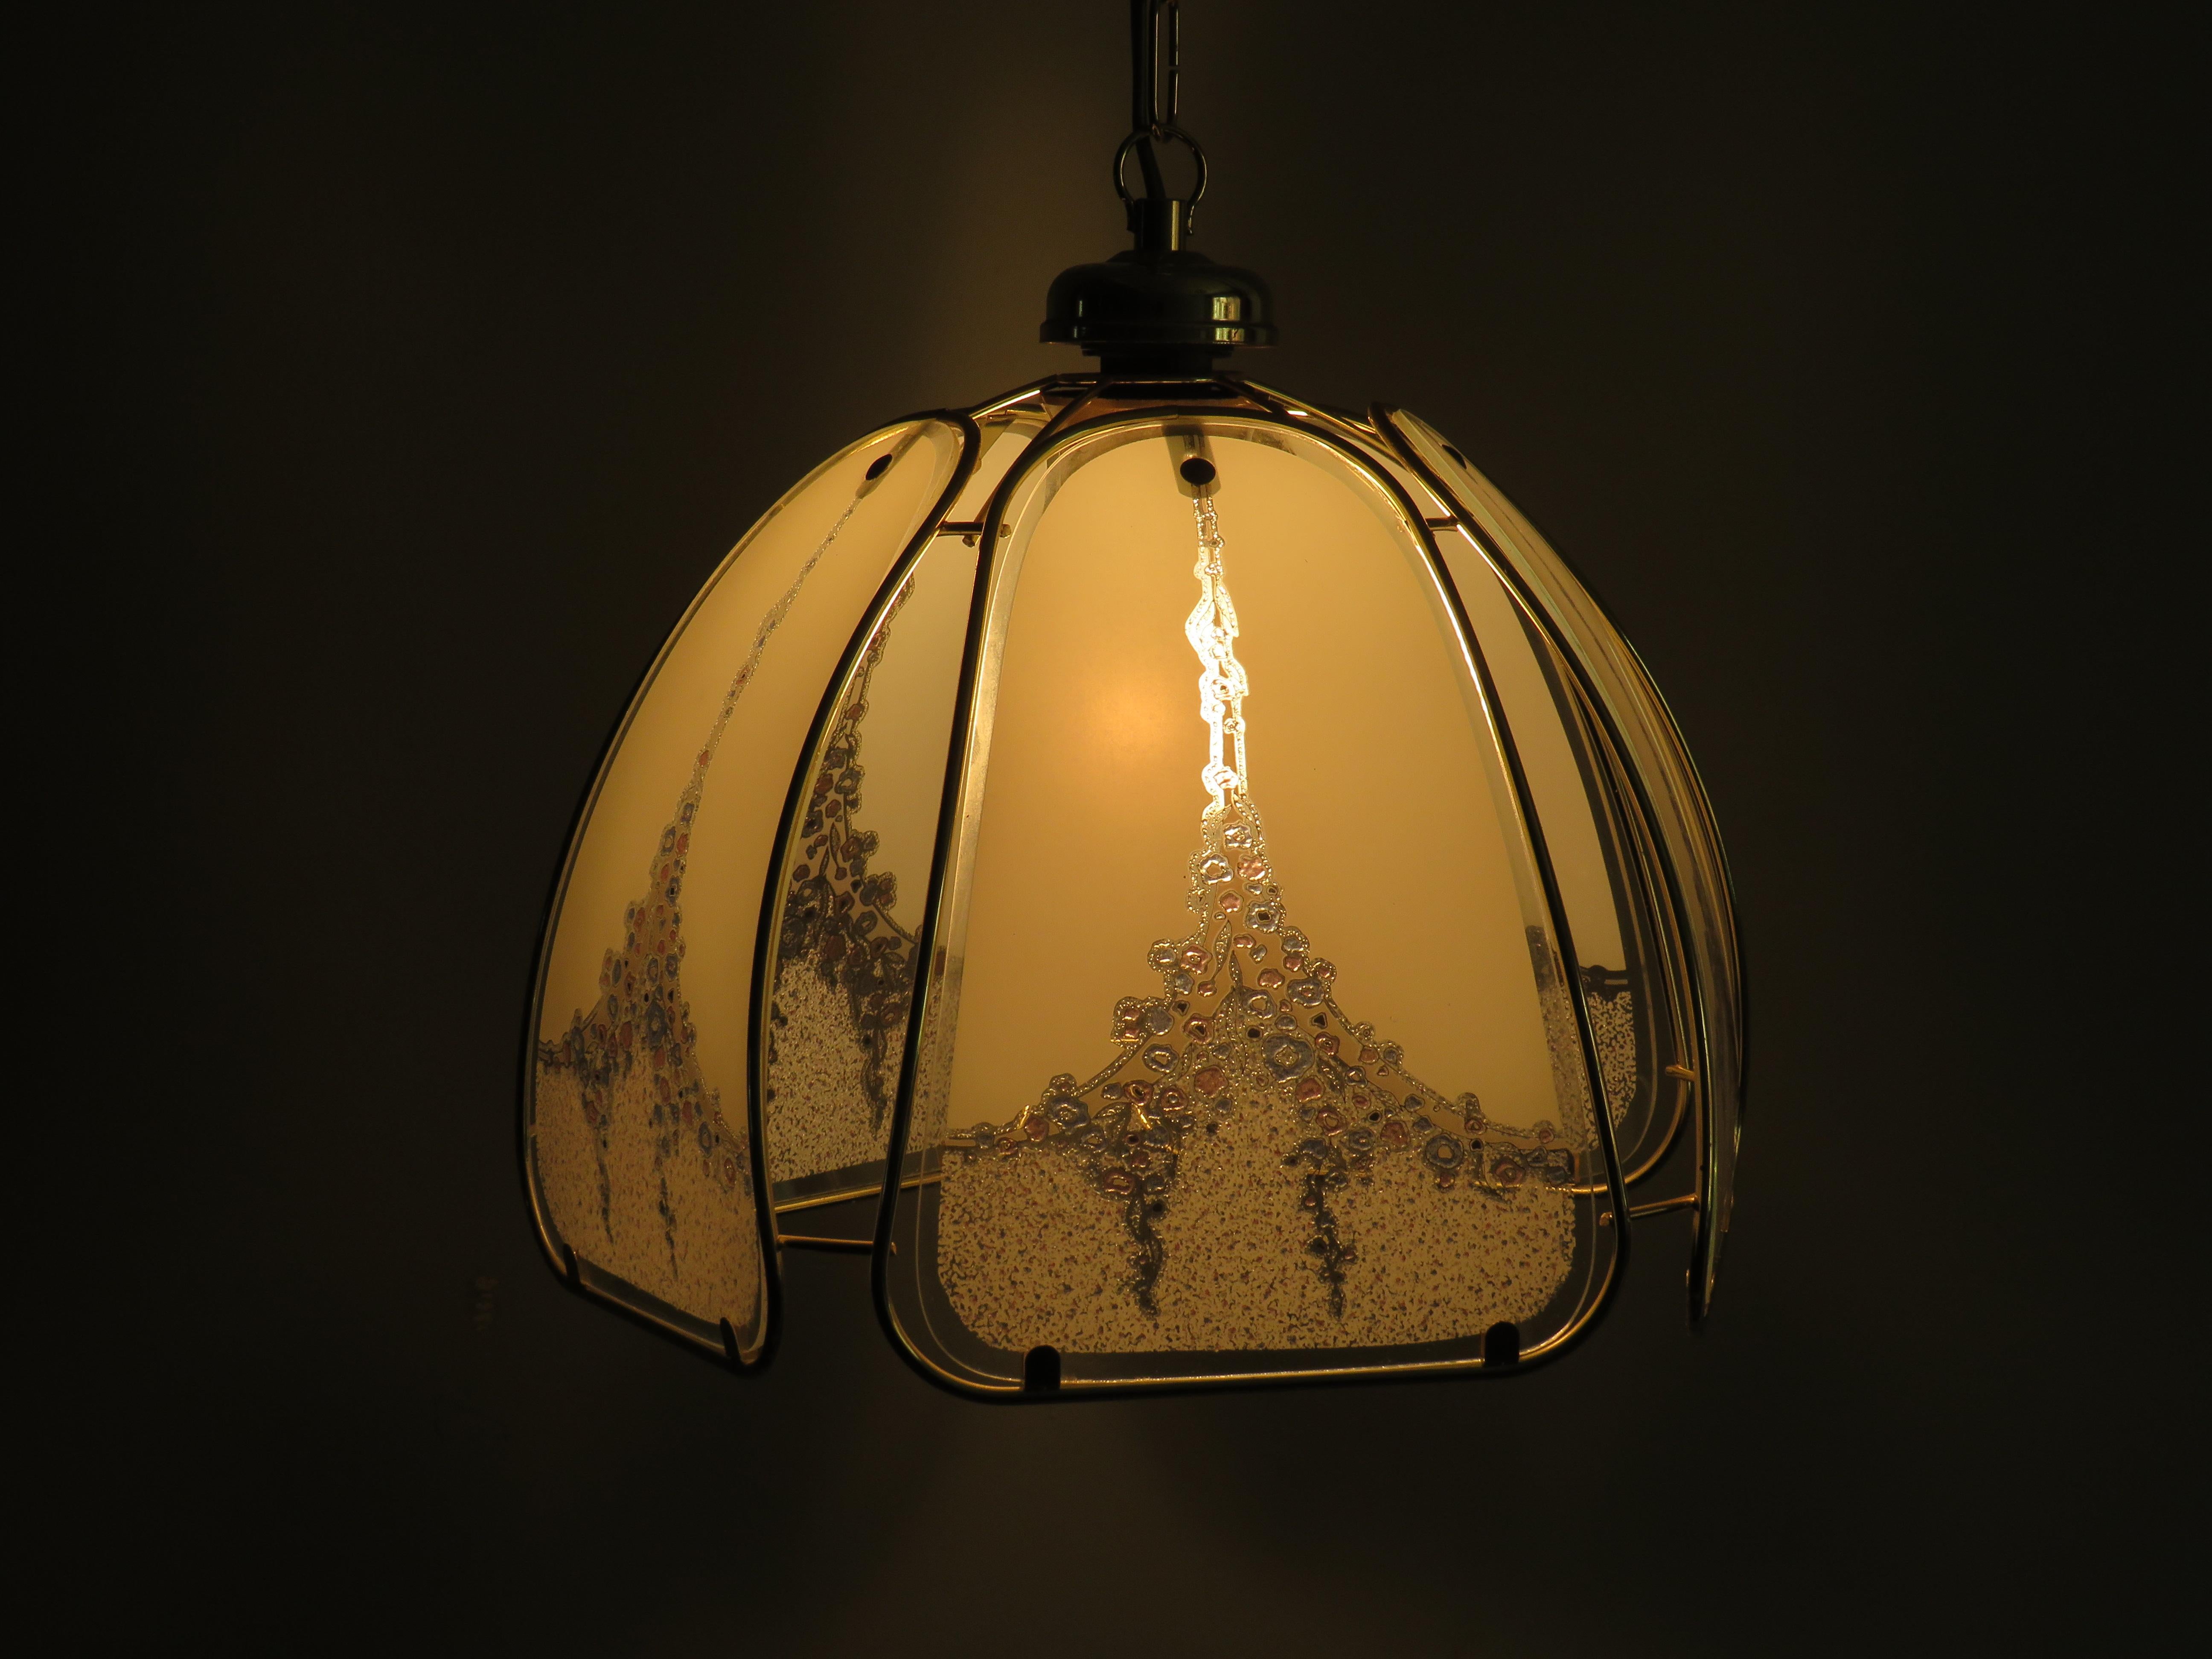 This pendant has 5 glass Murano panels set in a gold-colored metal frame. The glass panels have an ornate blue and pink floral design that is reminiscent of the Art Nouveau period.
Technical details: Ceiling cap in gold-colored metal complete with